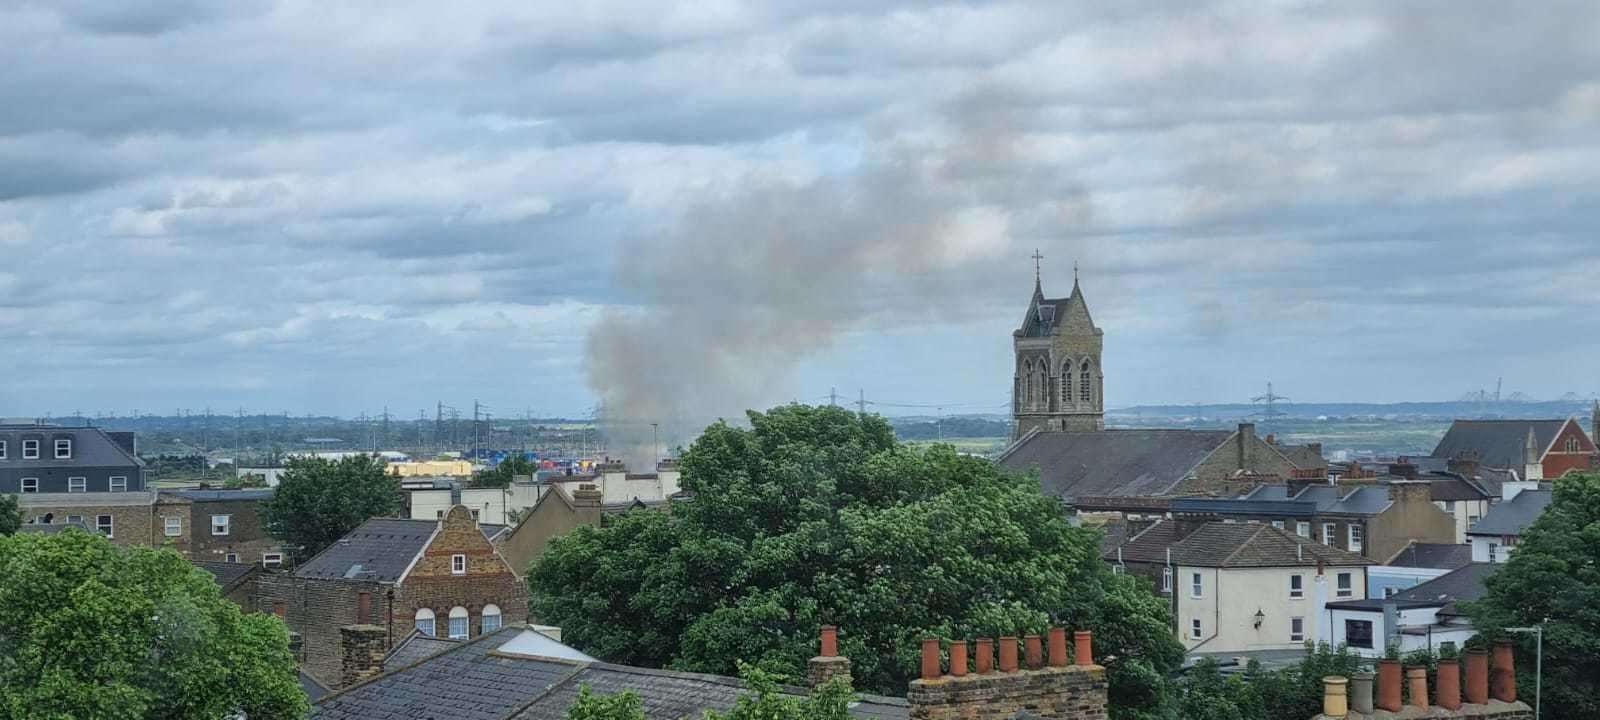 Fire could be seen billowing over Gravesend after a fire in Queen Street, Gravesend